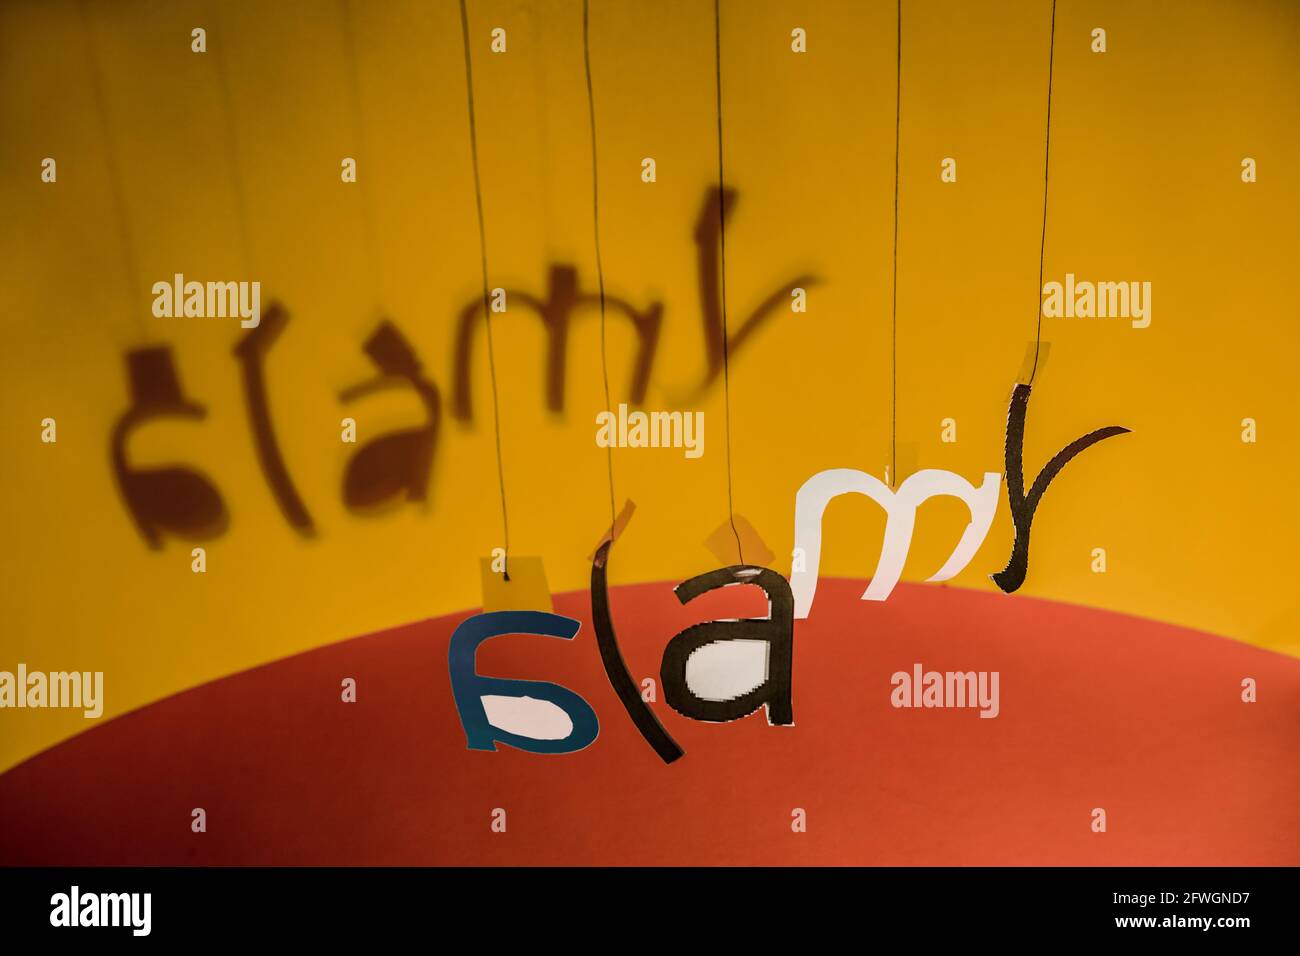 Letters hanging from threads form, in a certain disorder, the Alamy logo. Stock Photo